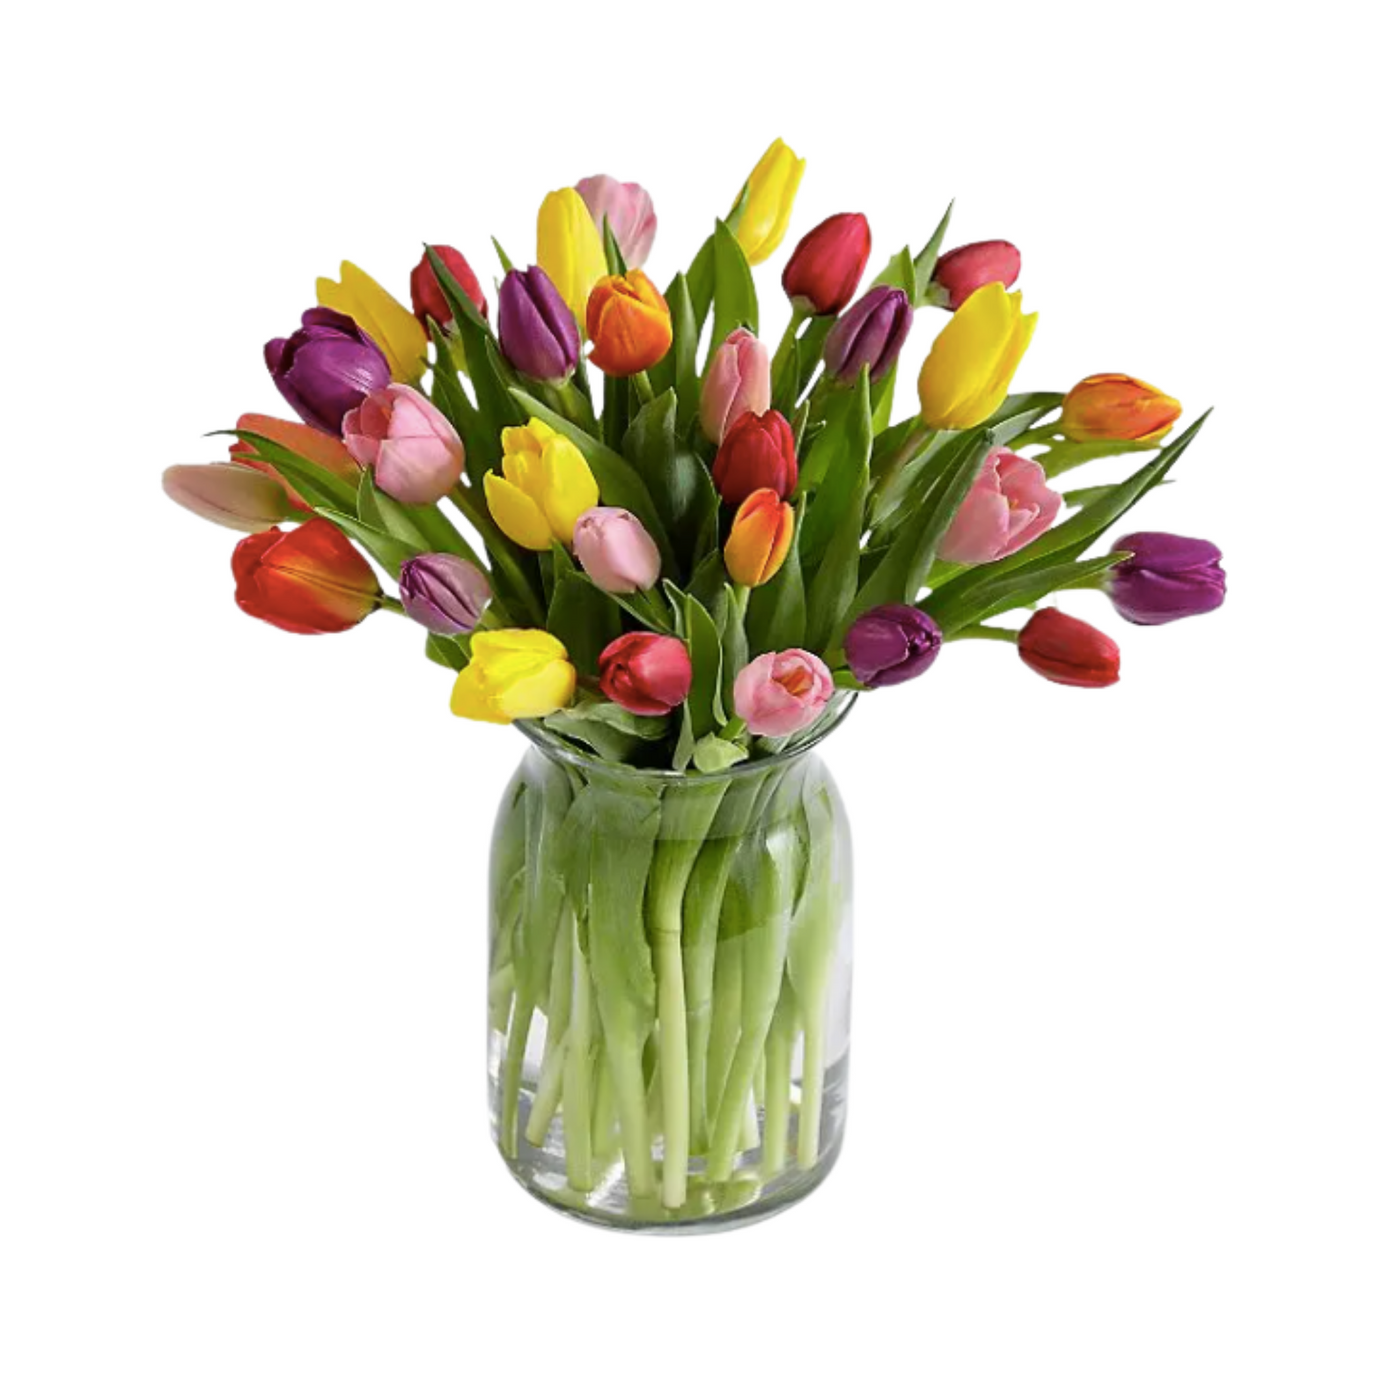 Spring Mix Tulips